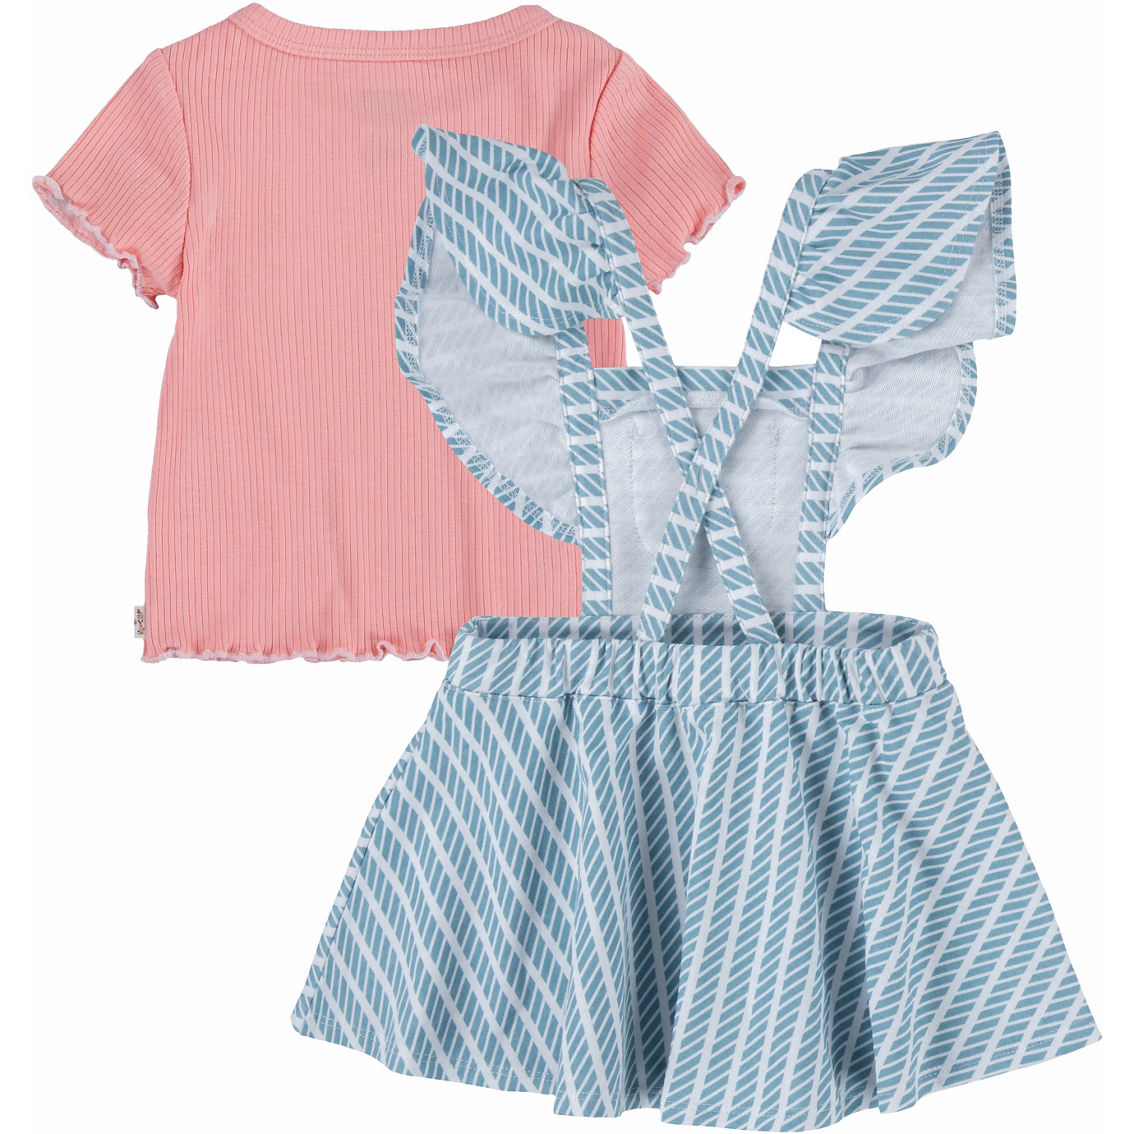 Levi's Baby Girls Tee and Skirtall 2 pc. Set - Image 2 of 4